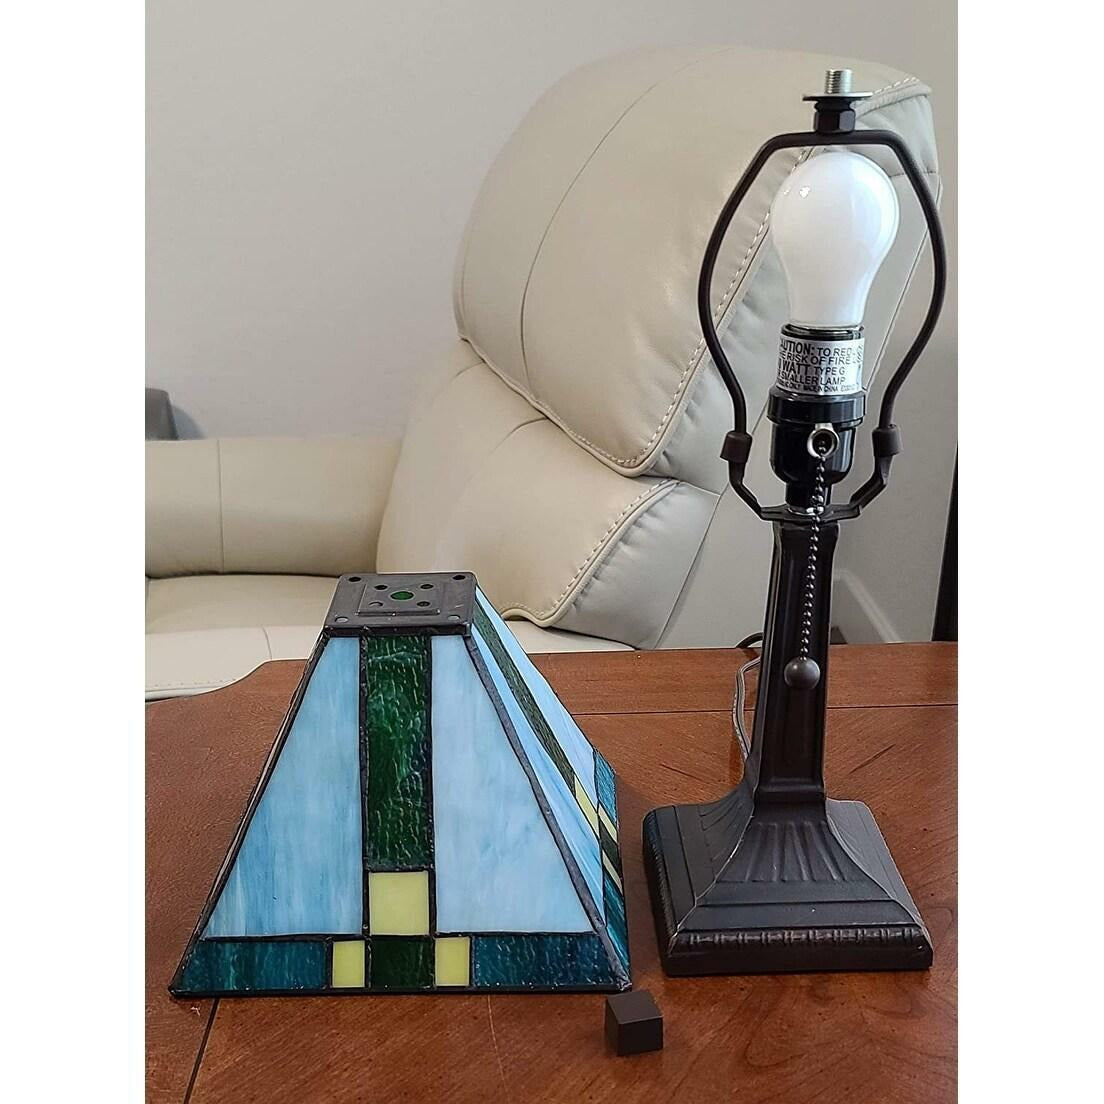 Tiffany Style Stained Glass Mission Table Lamp In Green and Yellow 14.5 Tall